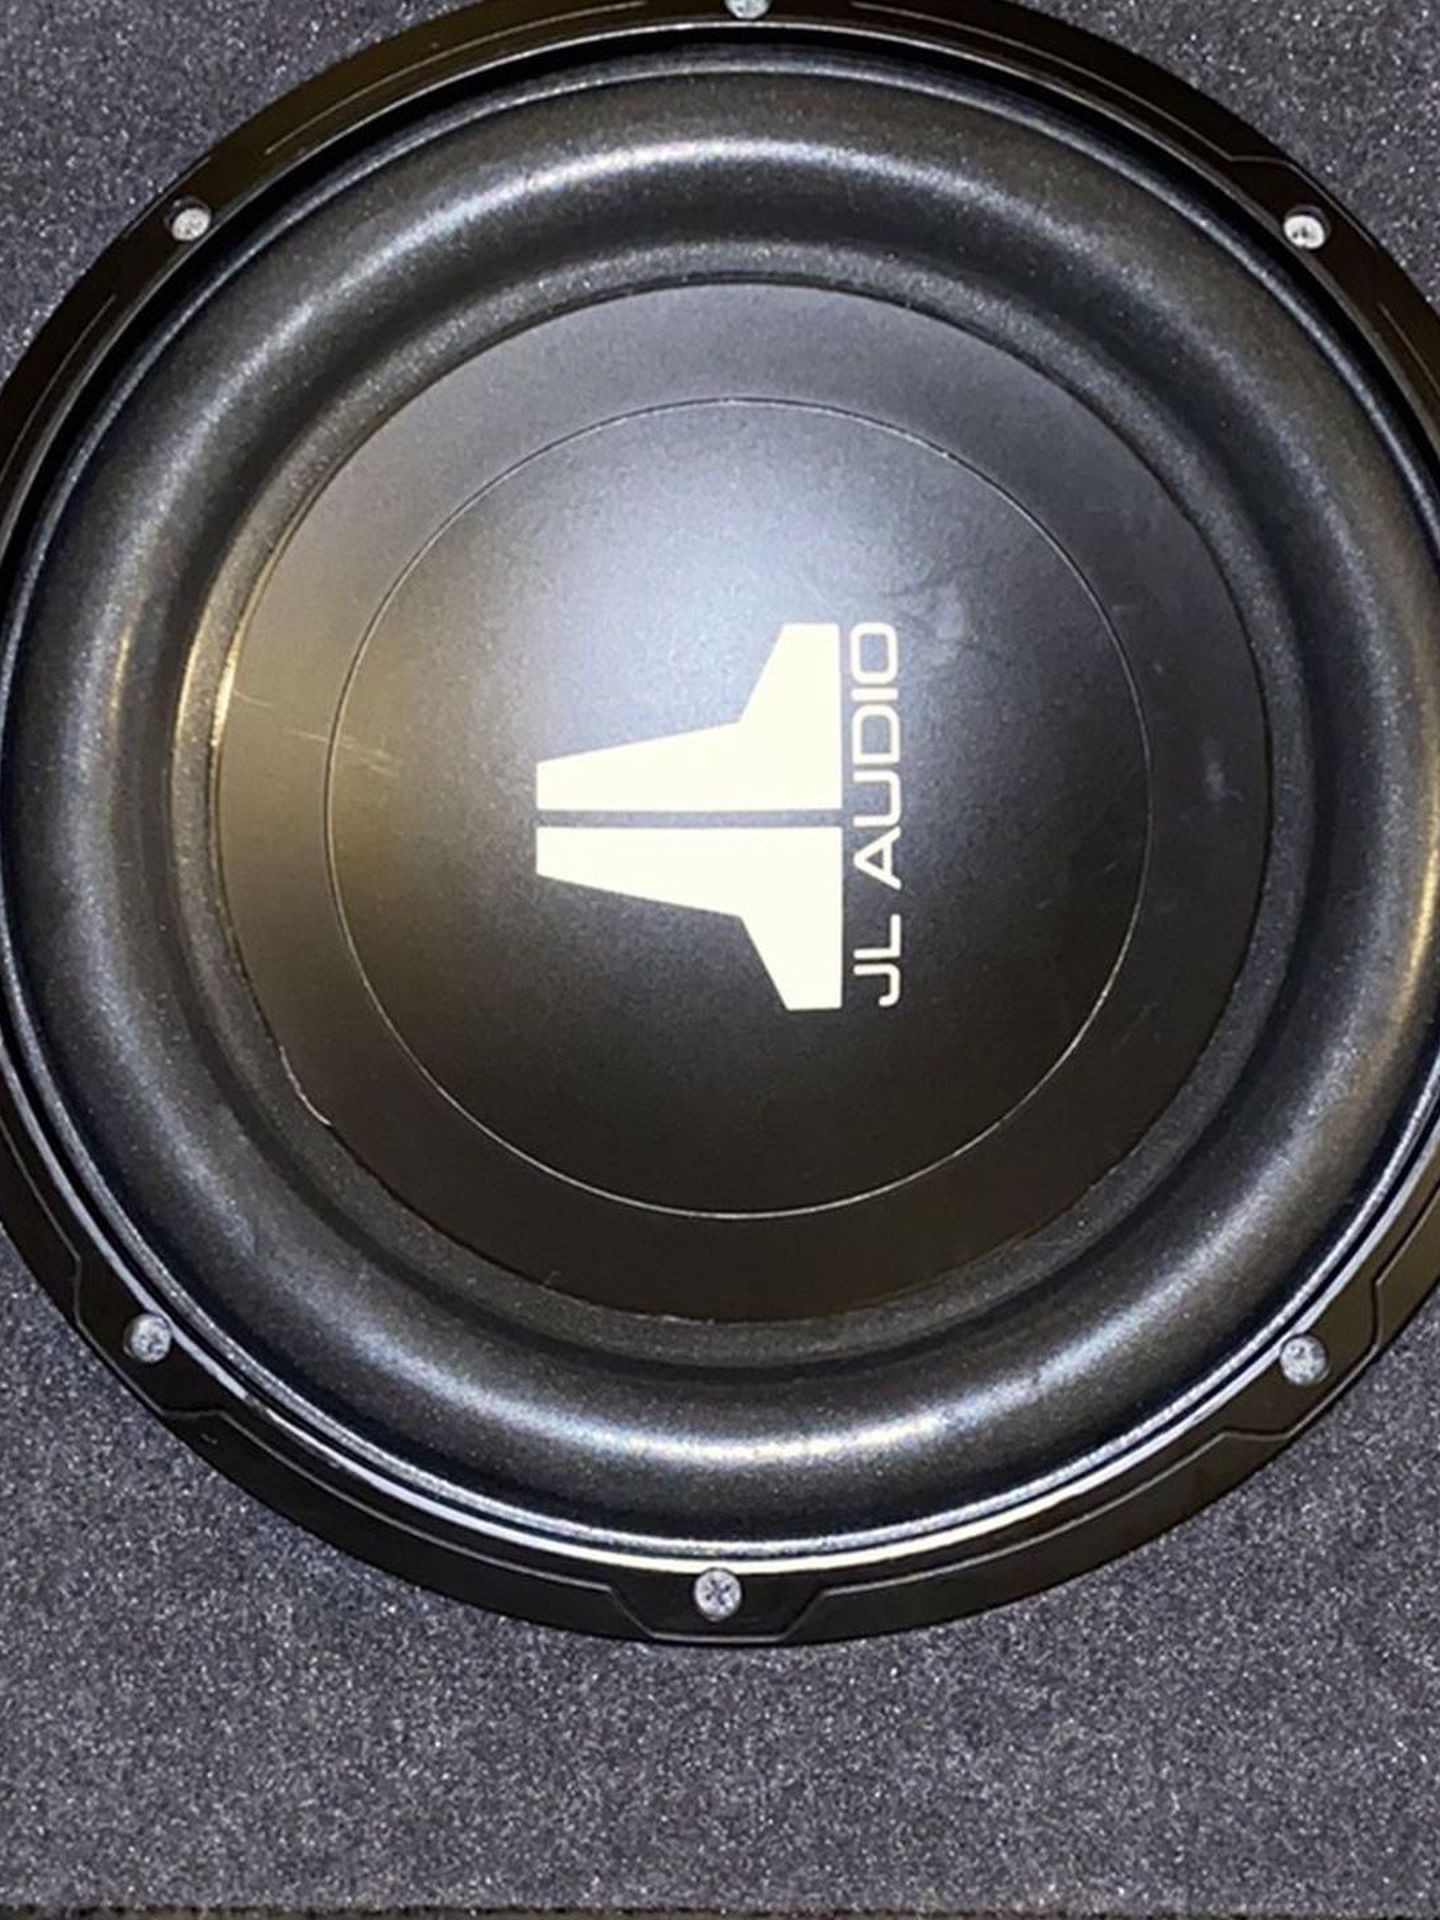 Auto Sound System Bundle (12” Subwoofer with Sub Box & 2-Channel Car Amplifier) See Further Details Below